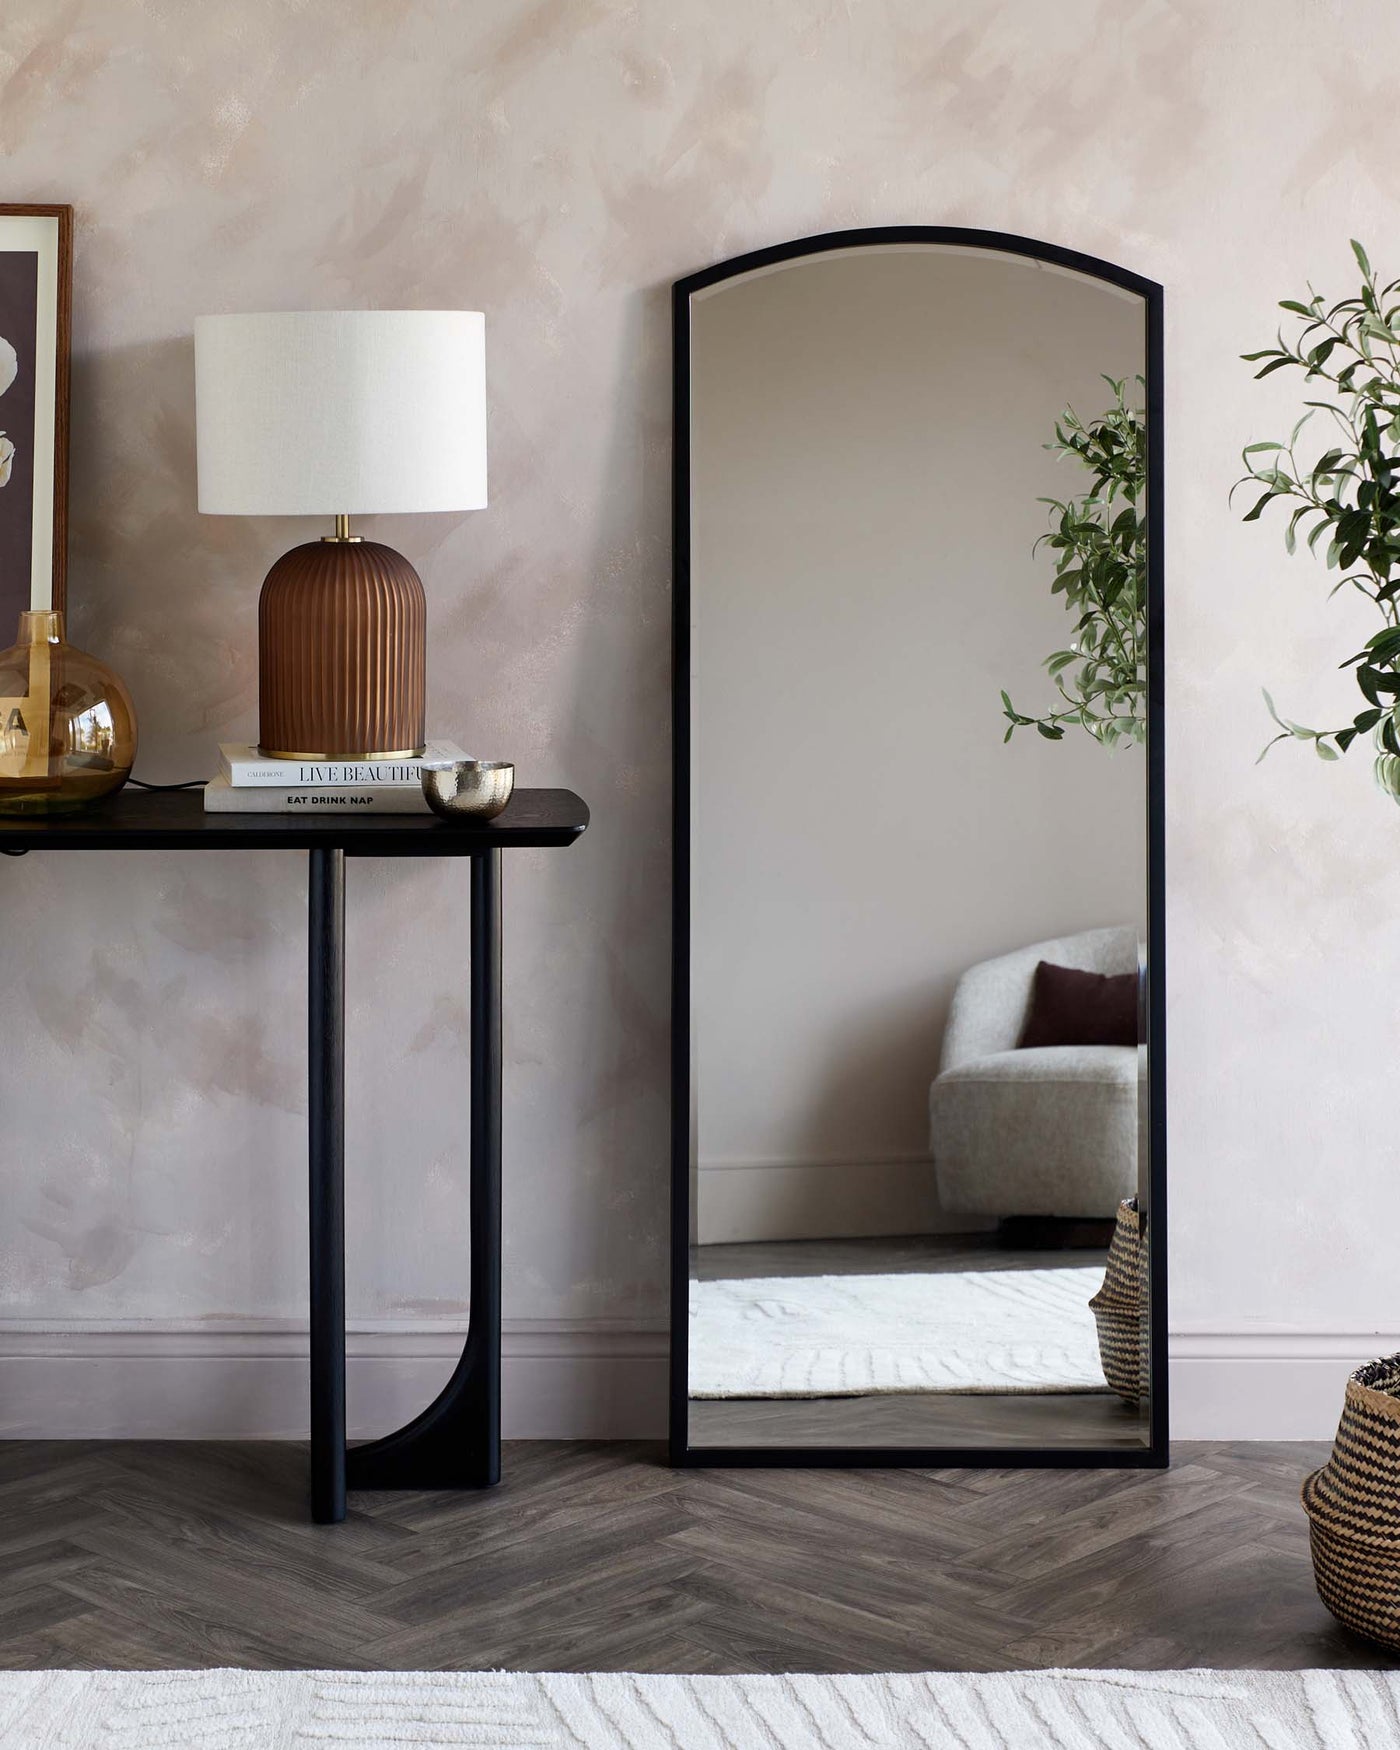 A sleek black console table with a minimalist design and an arch-top full-length floor mirror with a slender black frame.